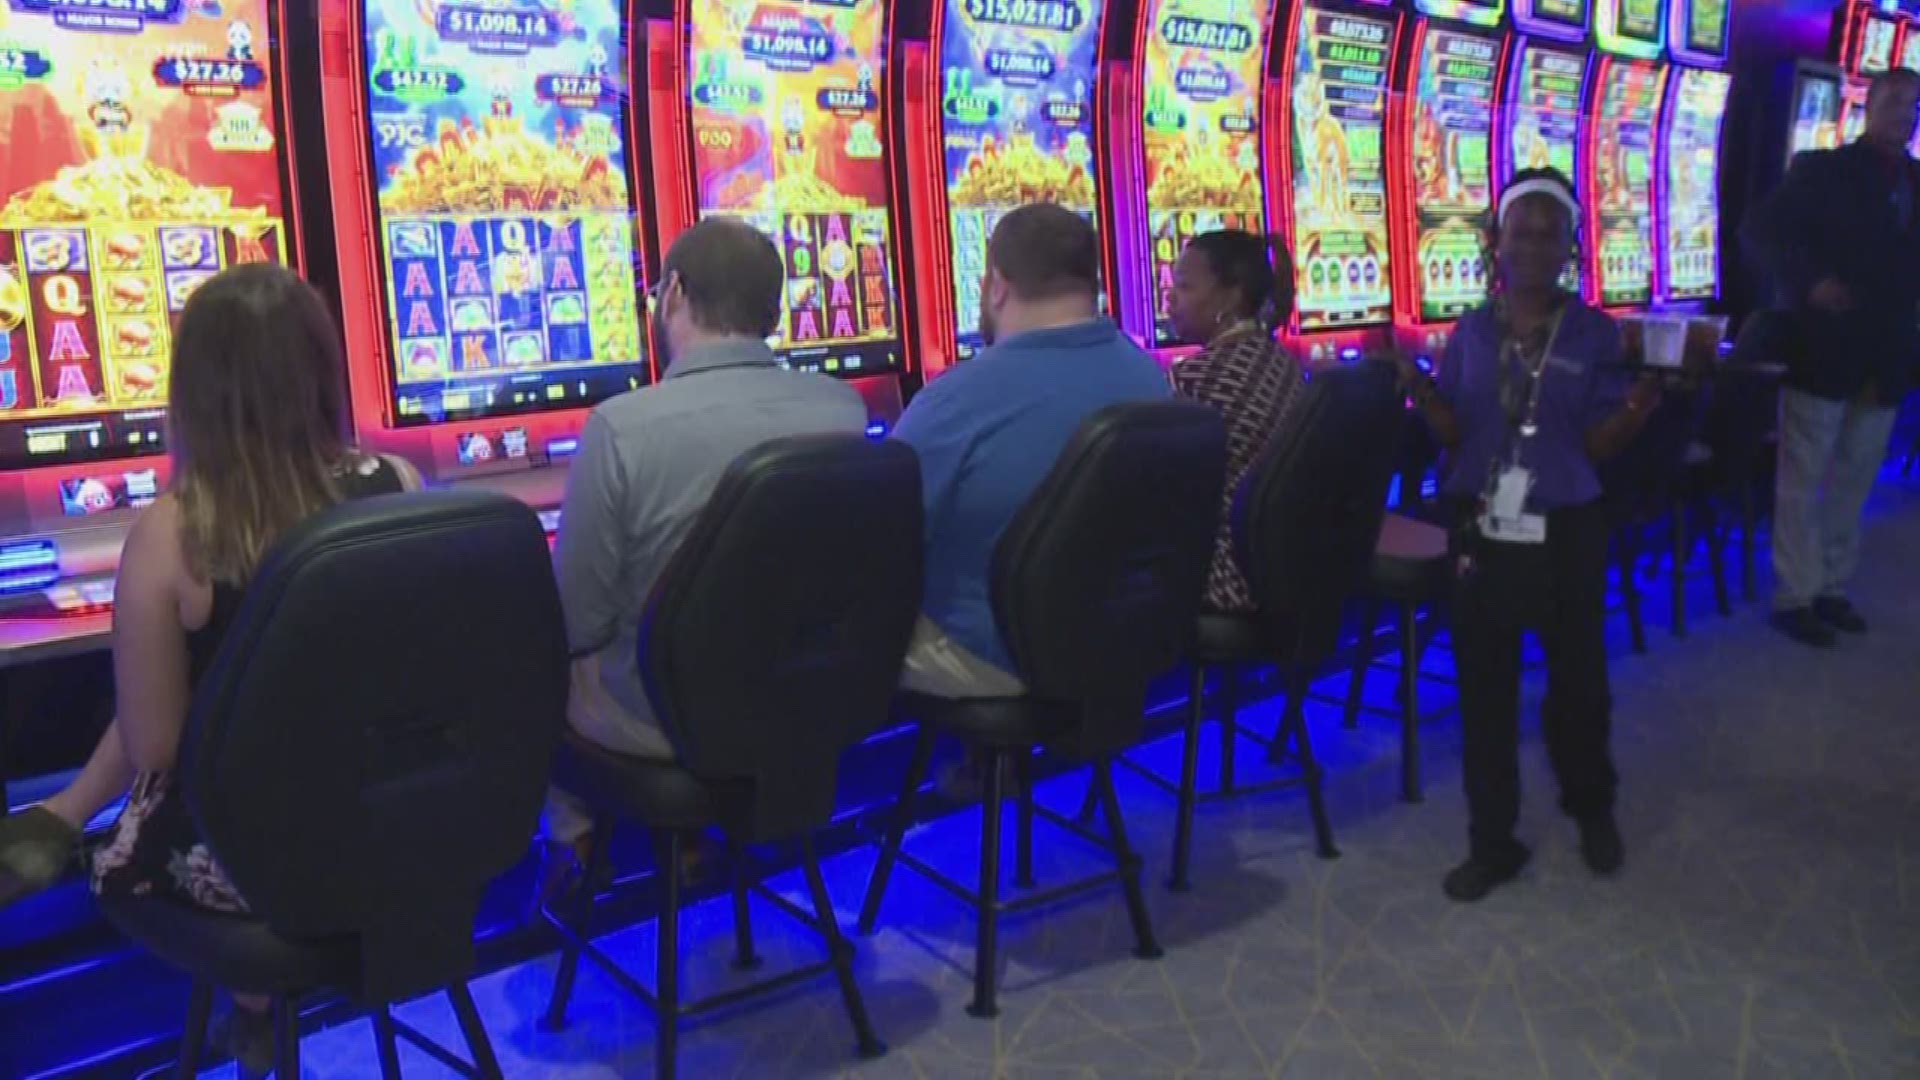 The Saracen Casino Annex had its grand opening Tuesday and it has 300 slot machines, a sports bar and more.